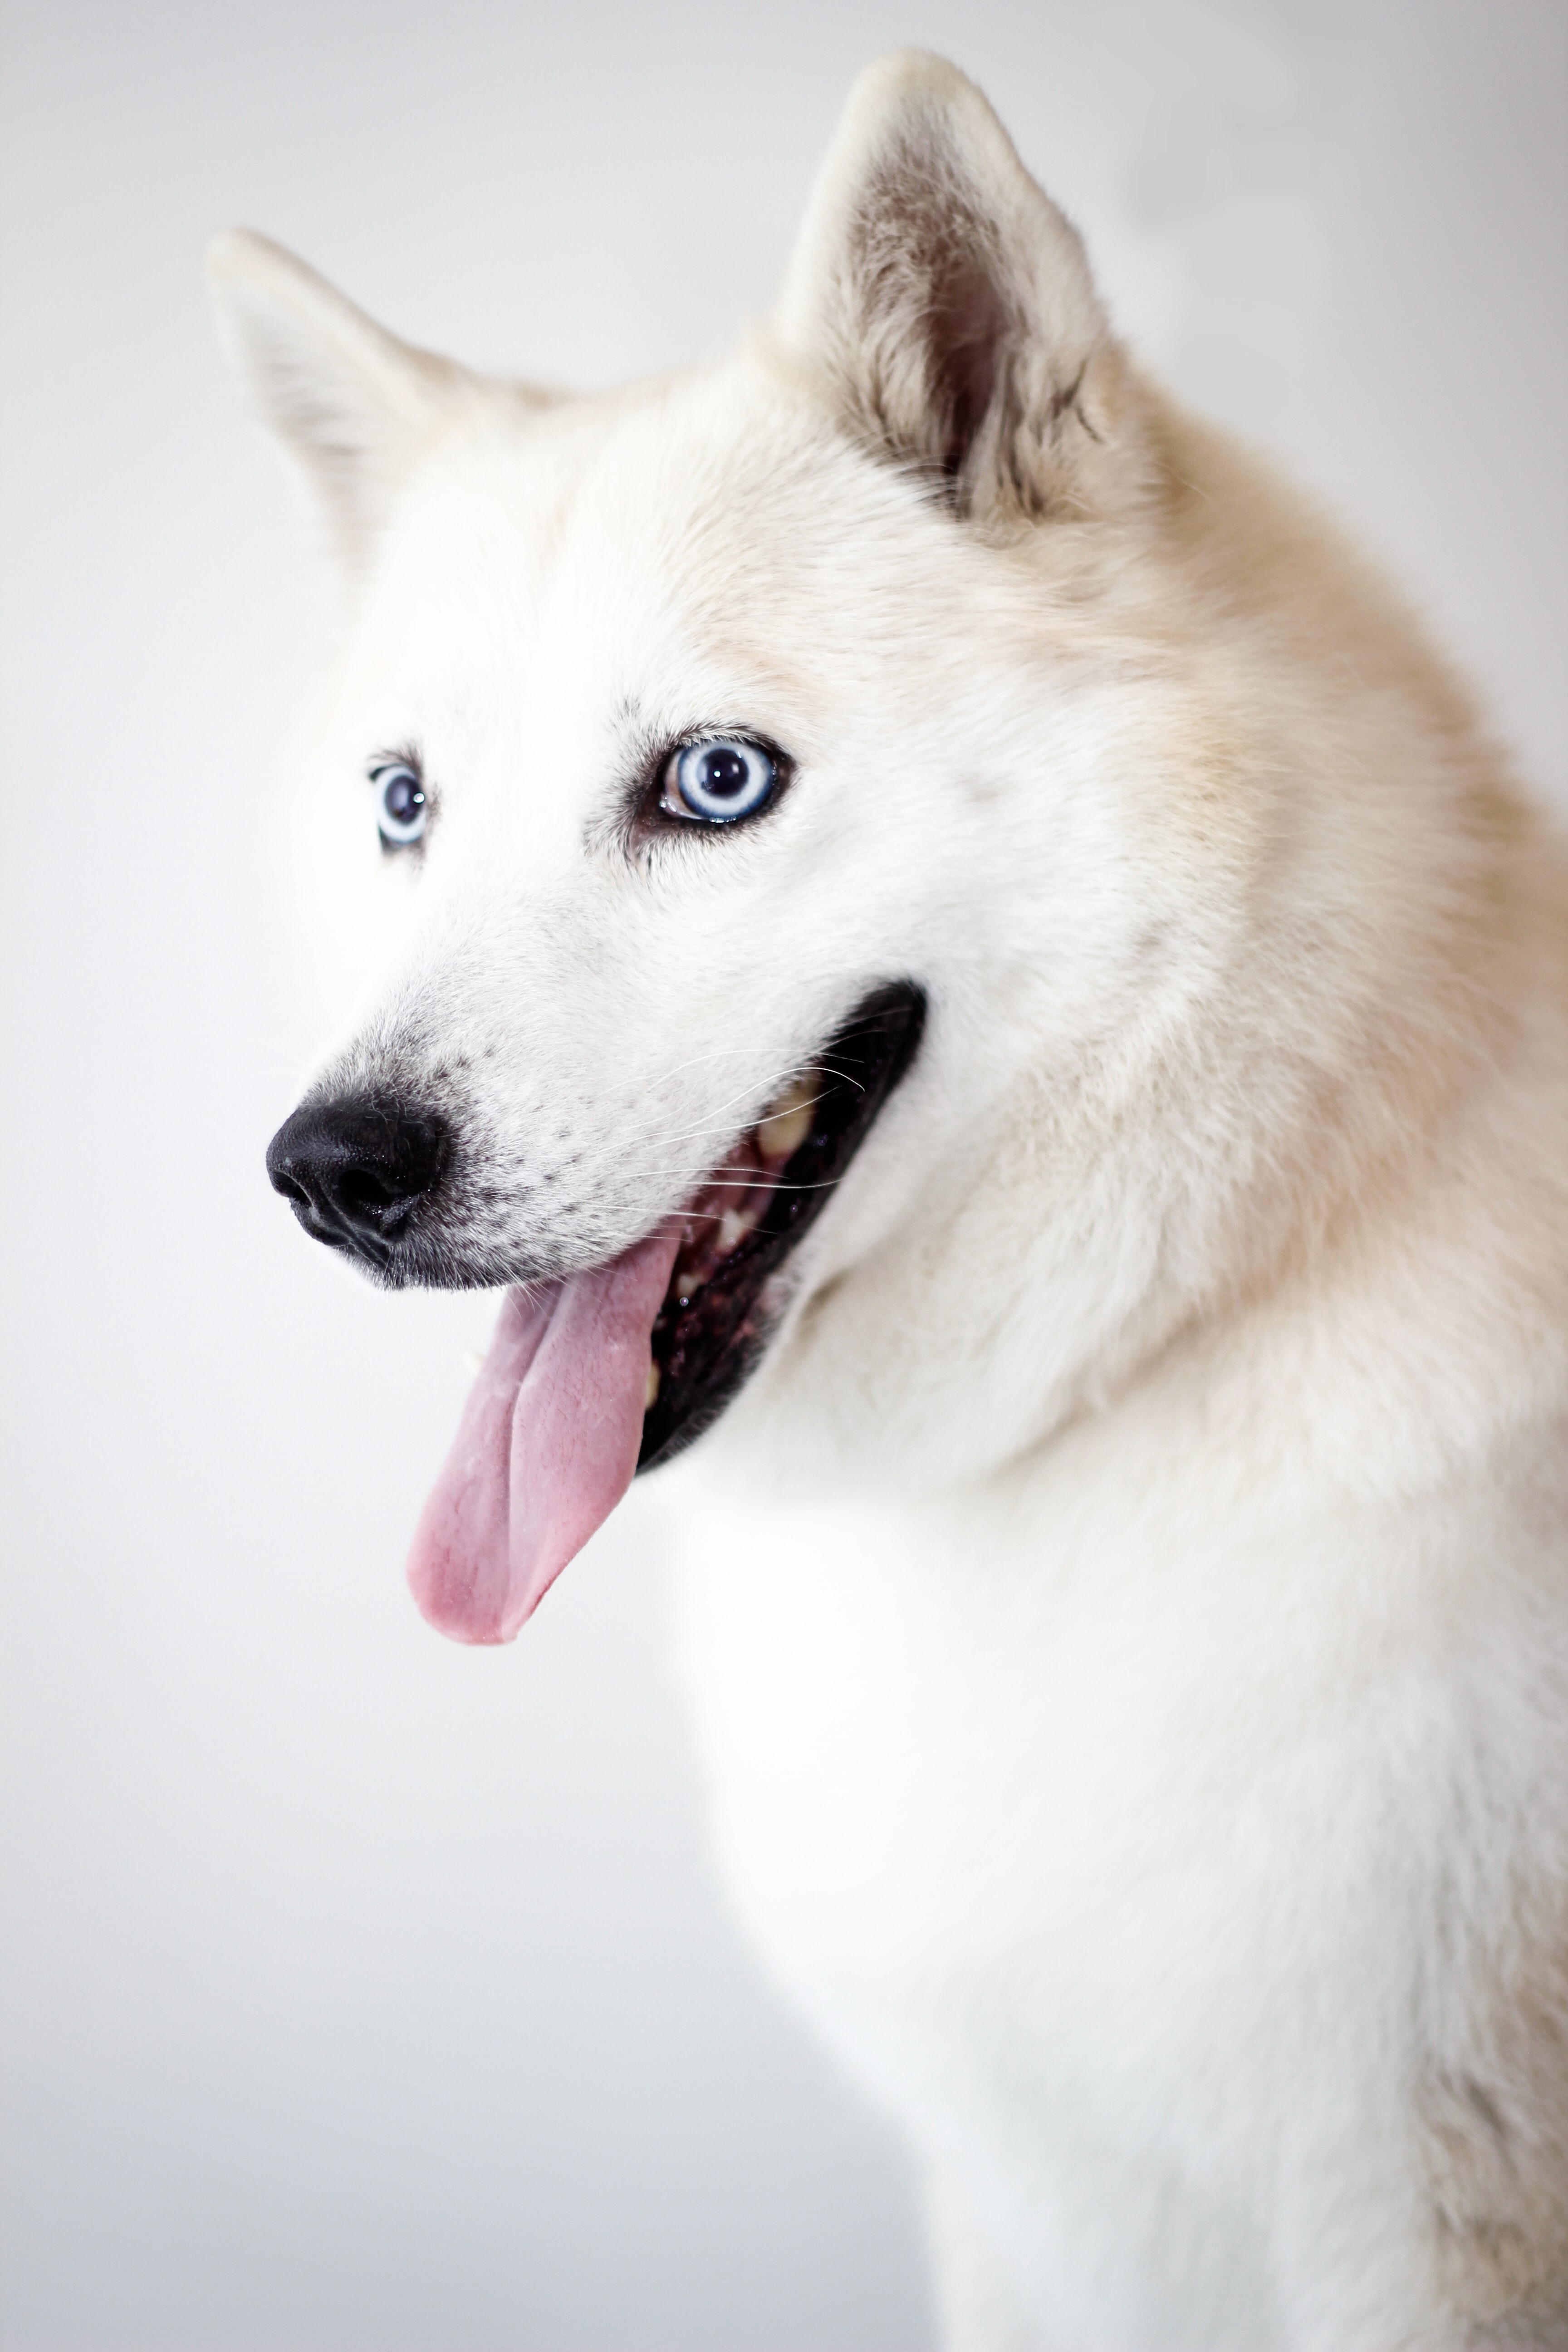 tongue stuck out, husky, animals, white, dog, protruding tongue cellphone